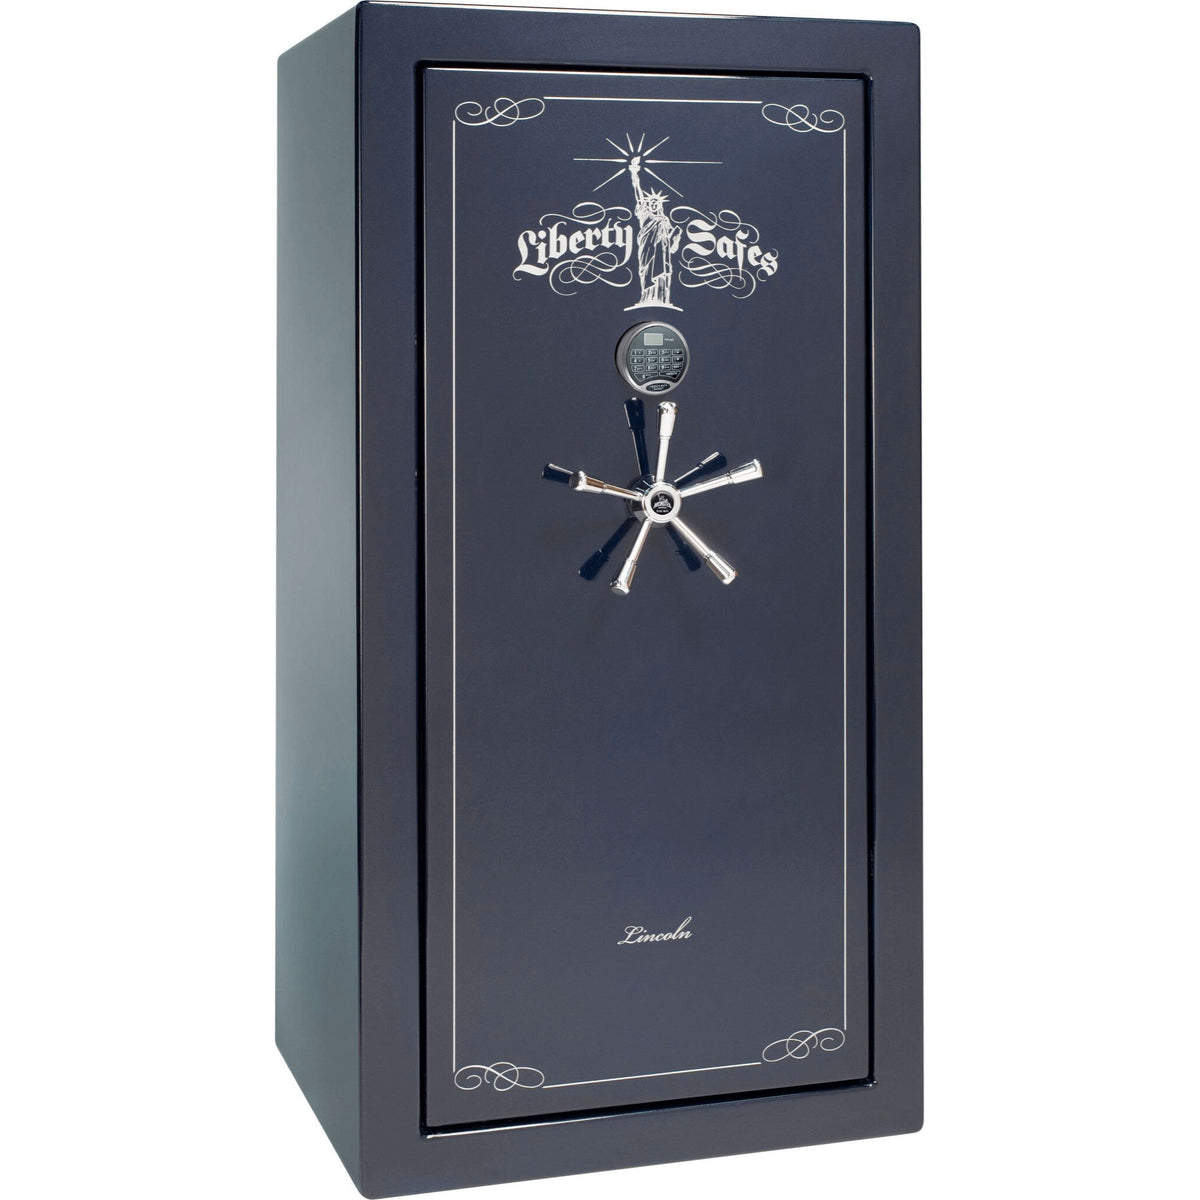 Liberty Lincoln 25 Safe in Blue Gloss with Chrome Electronic Lock.